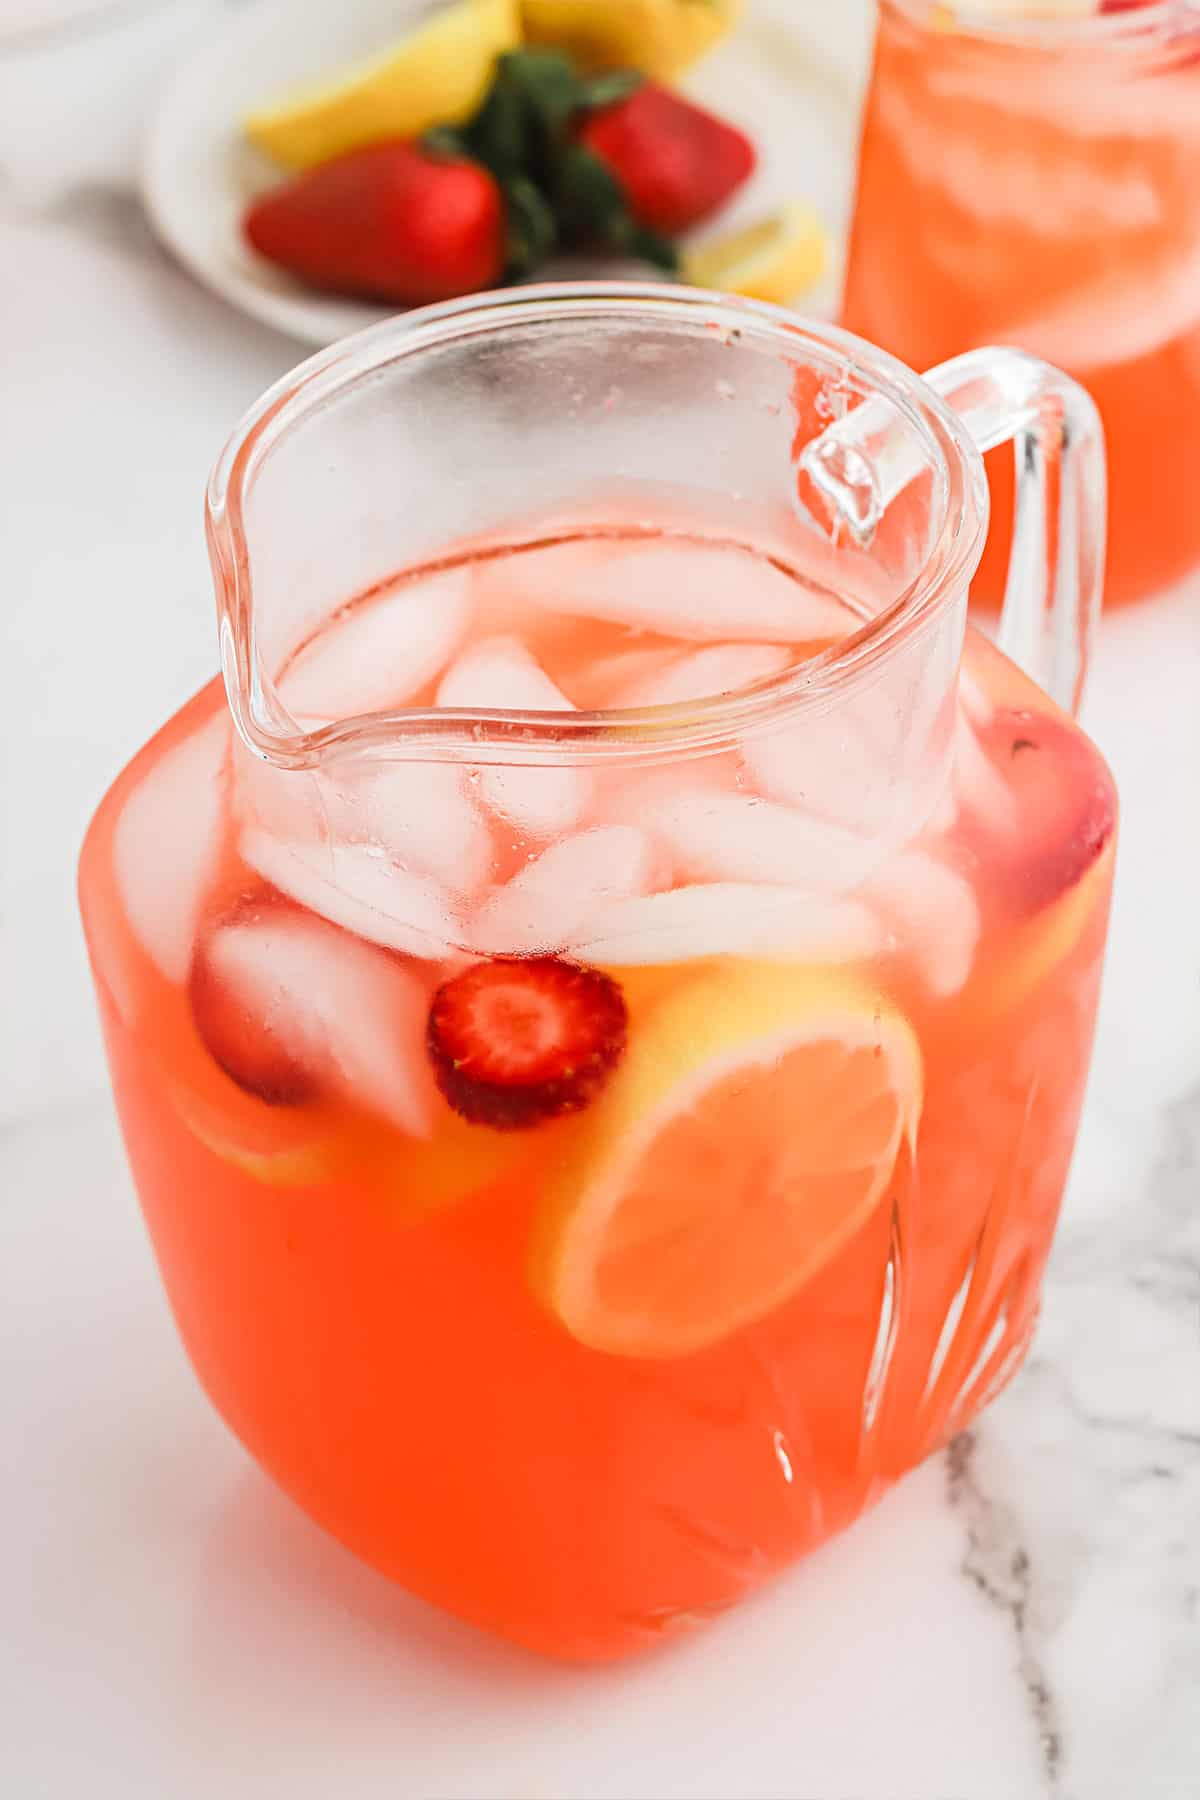 A pitcher of strawberry lemonade with ice on the table.